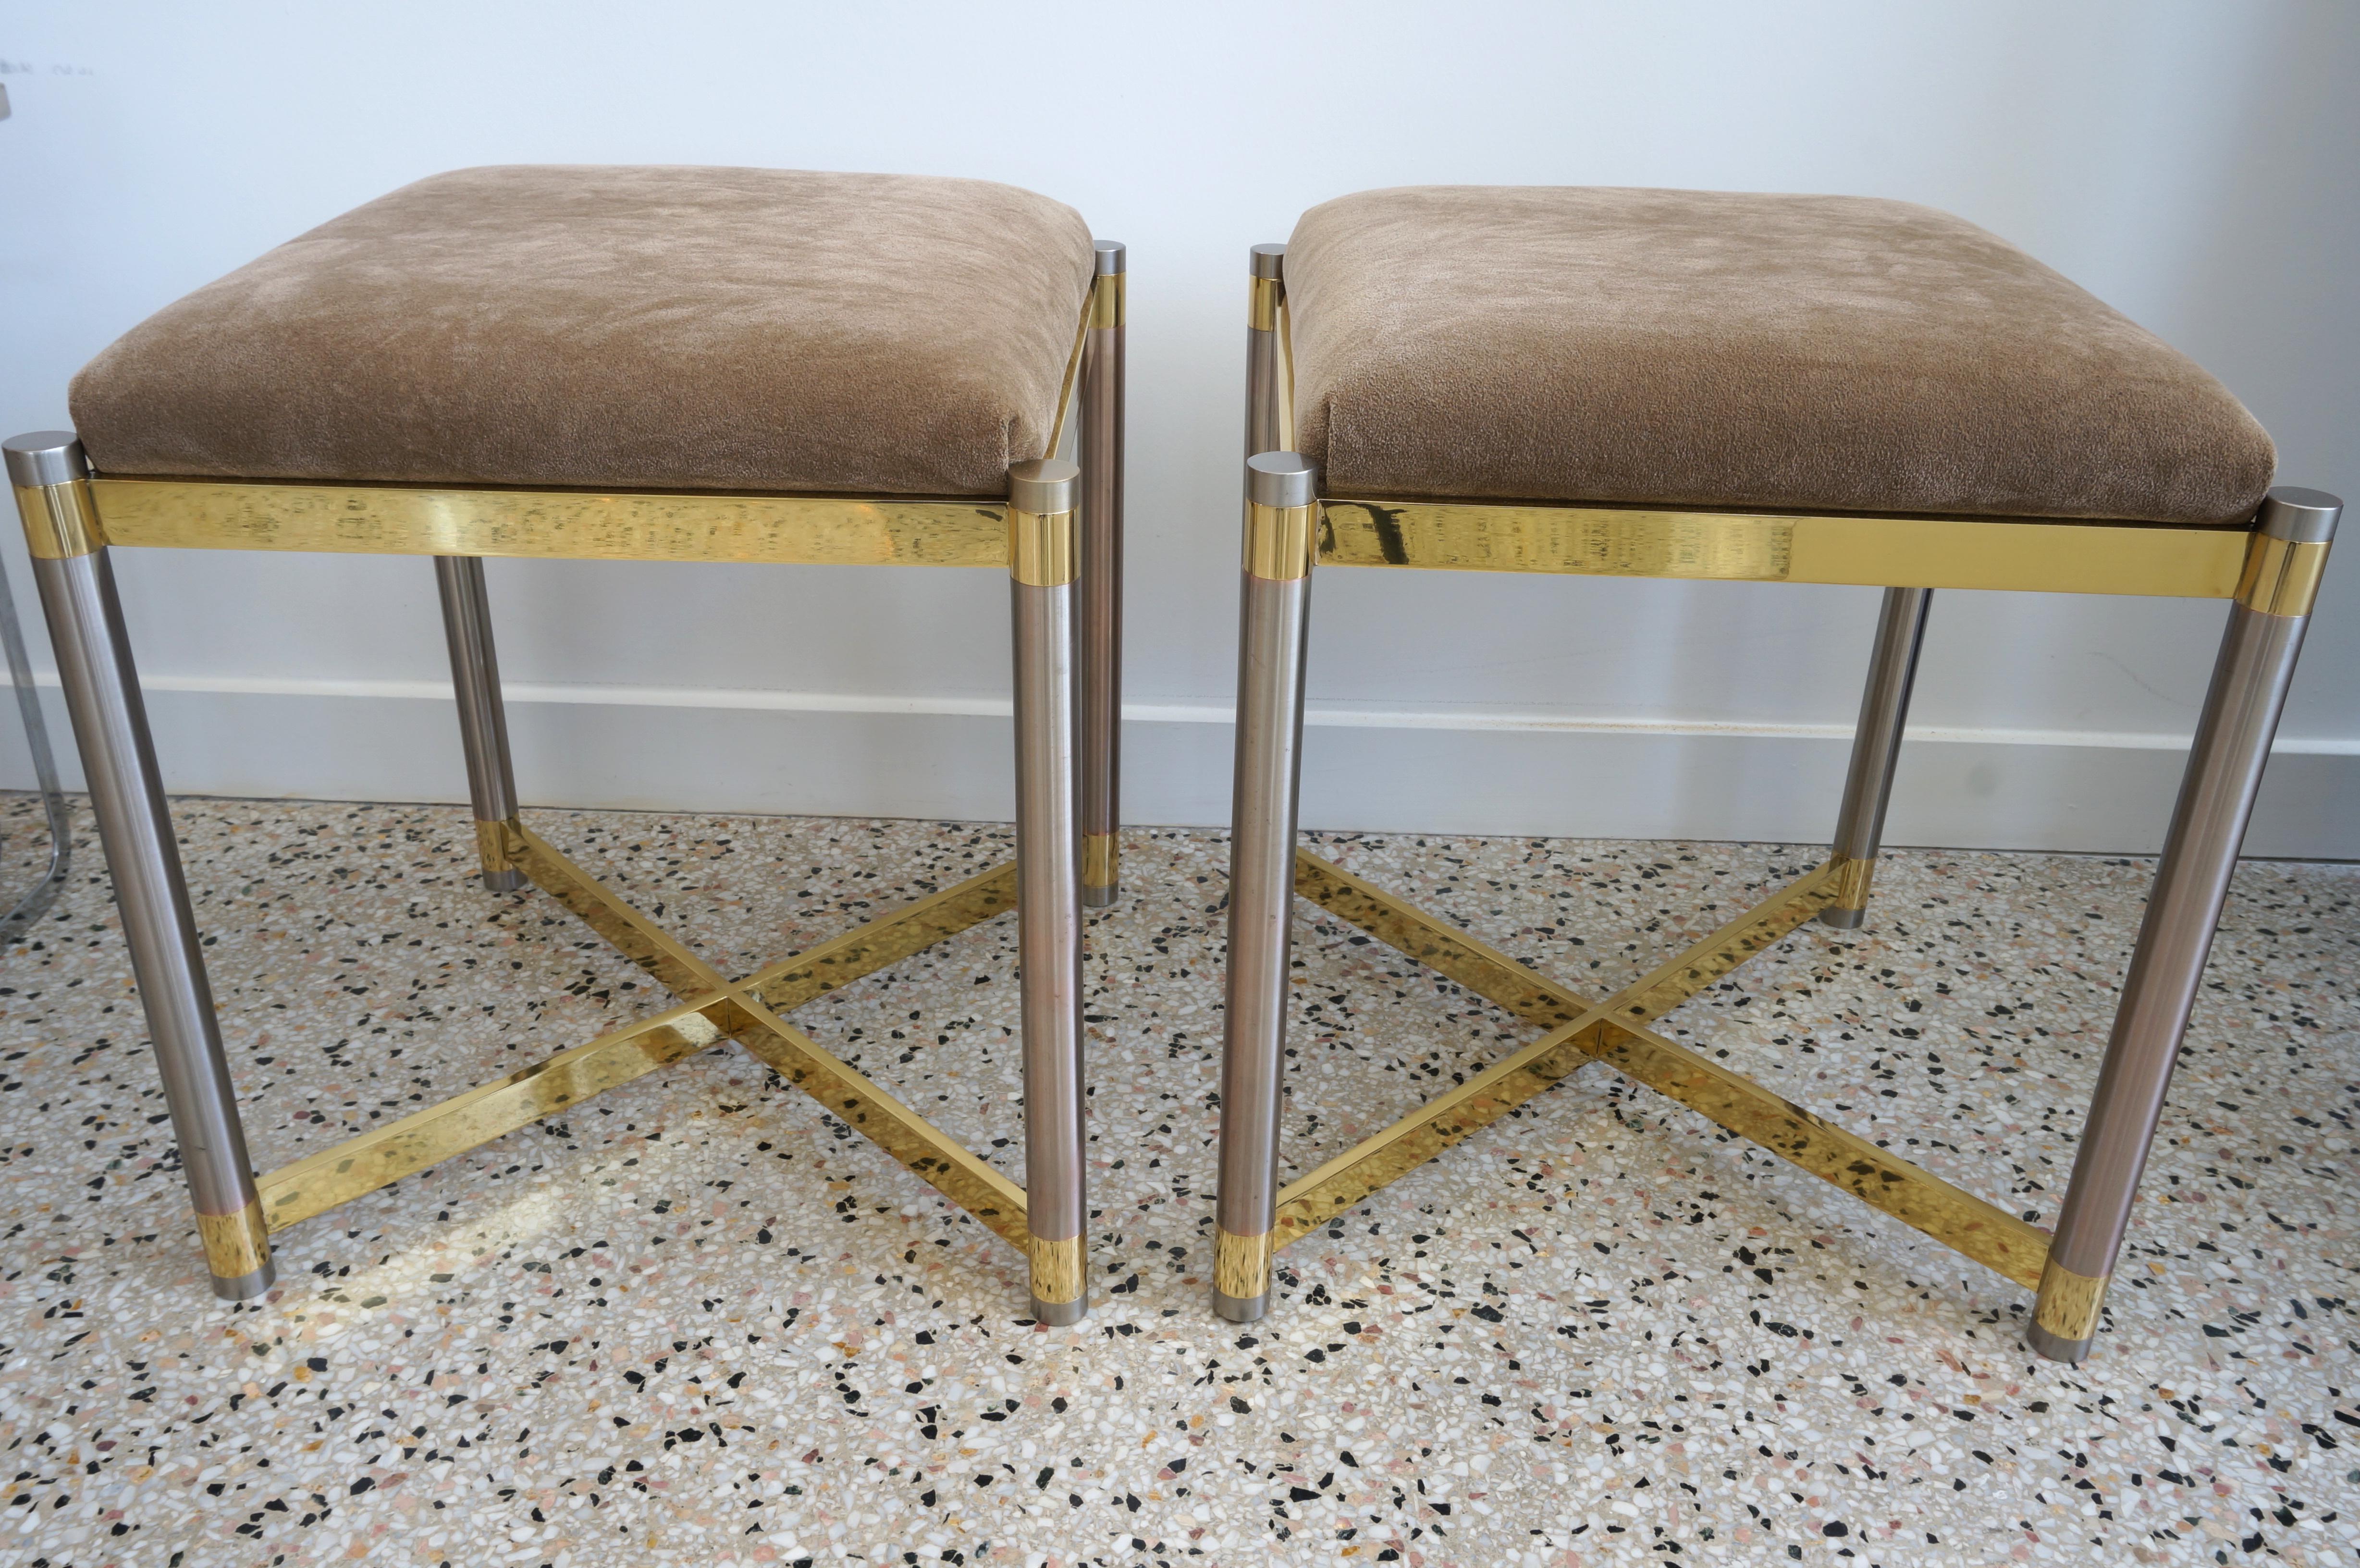 This stylish and chic pair of benches are attributed to Maison Jansen and they date to the 1970s.

Note: The set has been professionally polished and the bras lacquered.